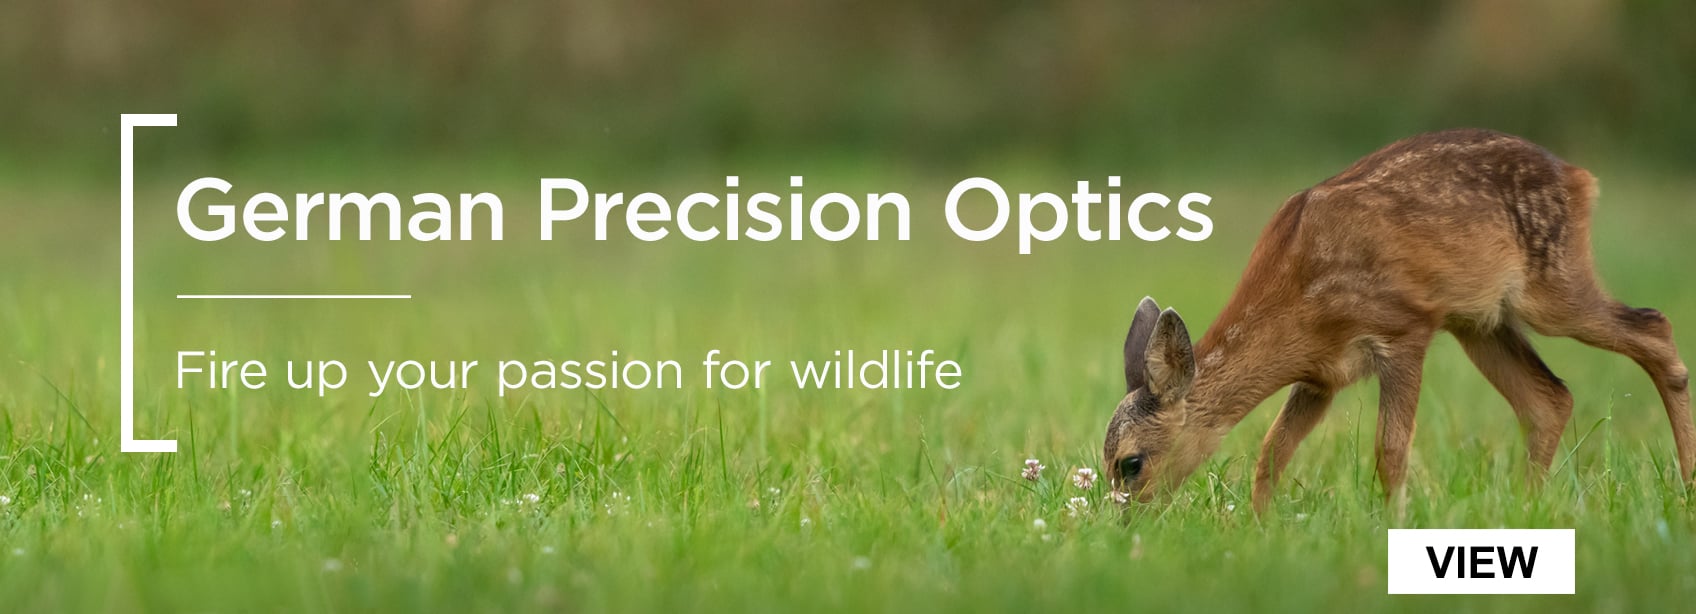 German Precision Optics | Fire up your Passion for Wildlife